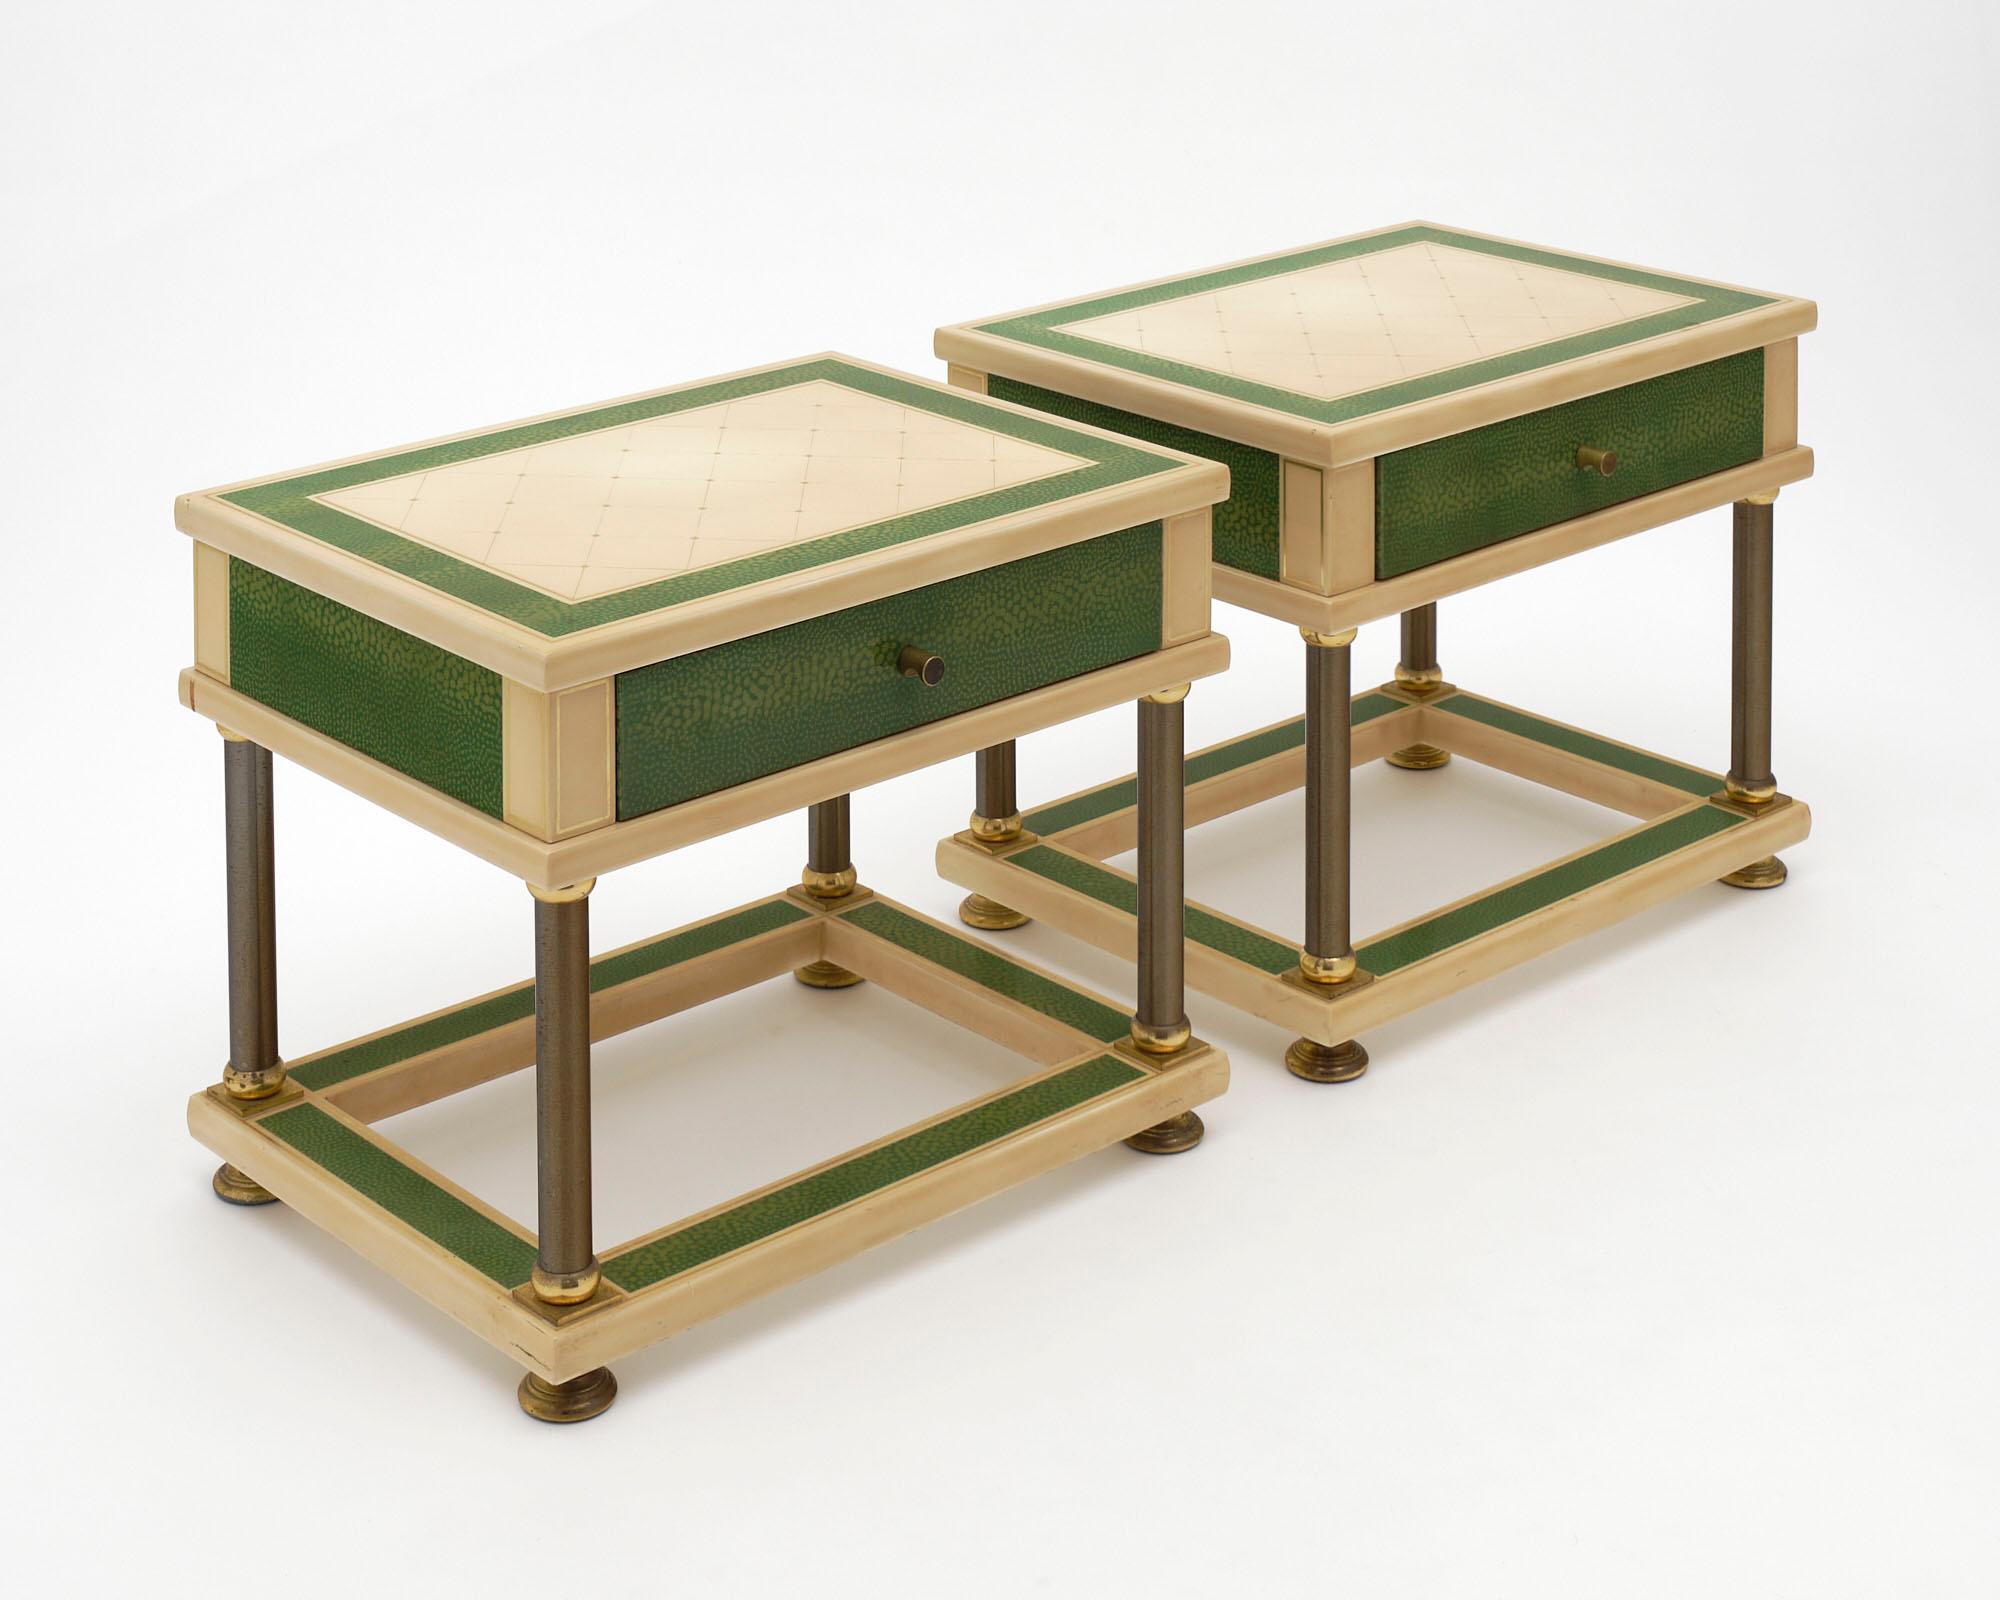 Pair of night stands, green and ivory lacquered wood, steel legs, by Jean-Claude Mahey.